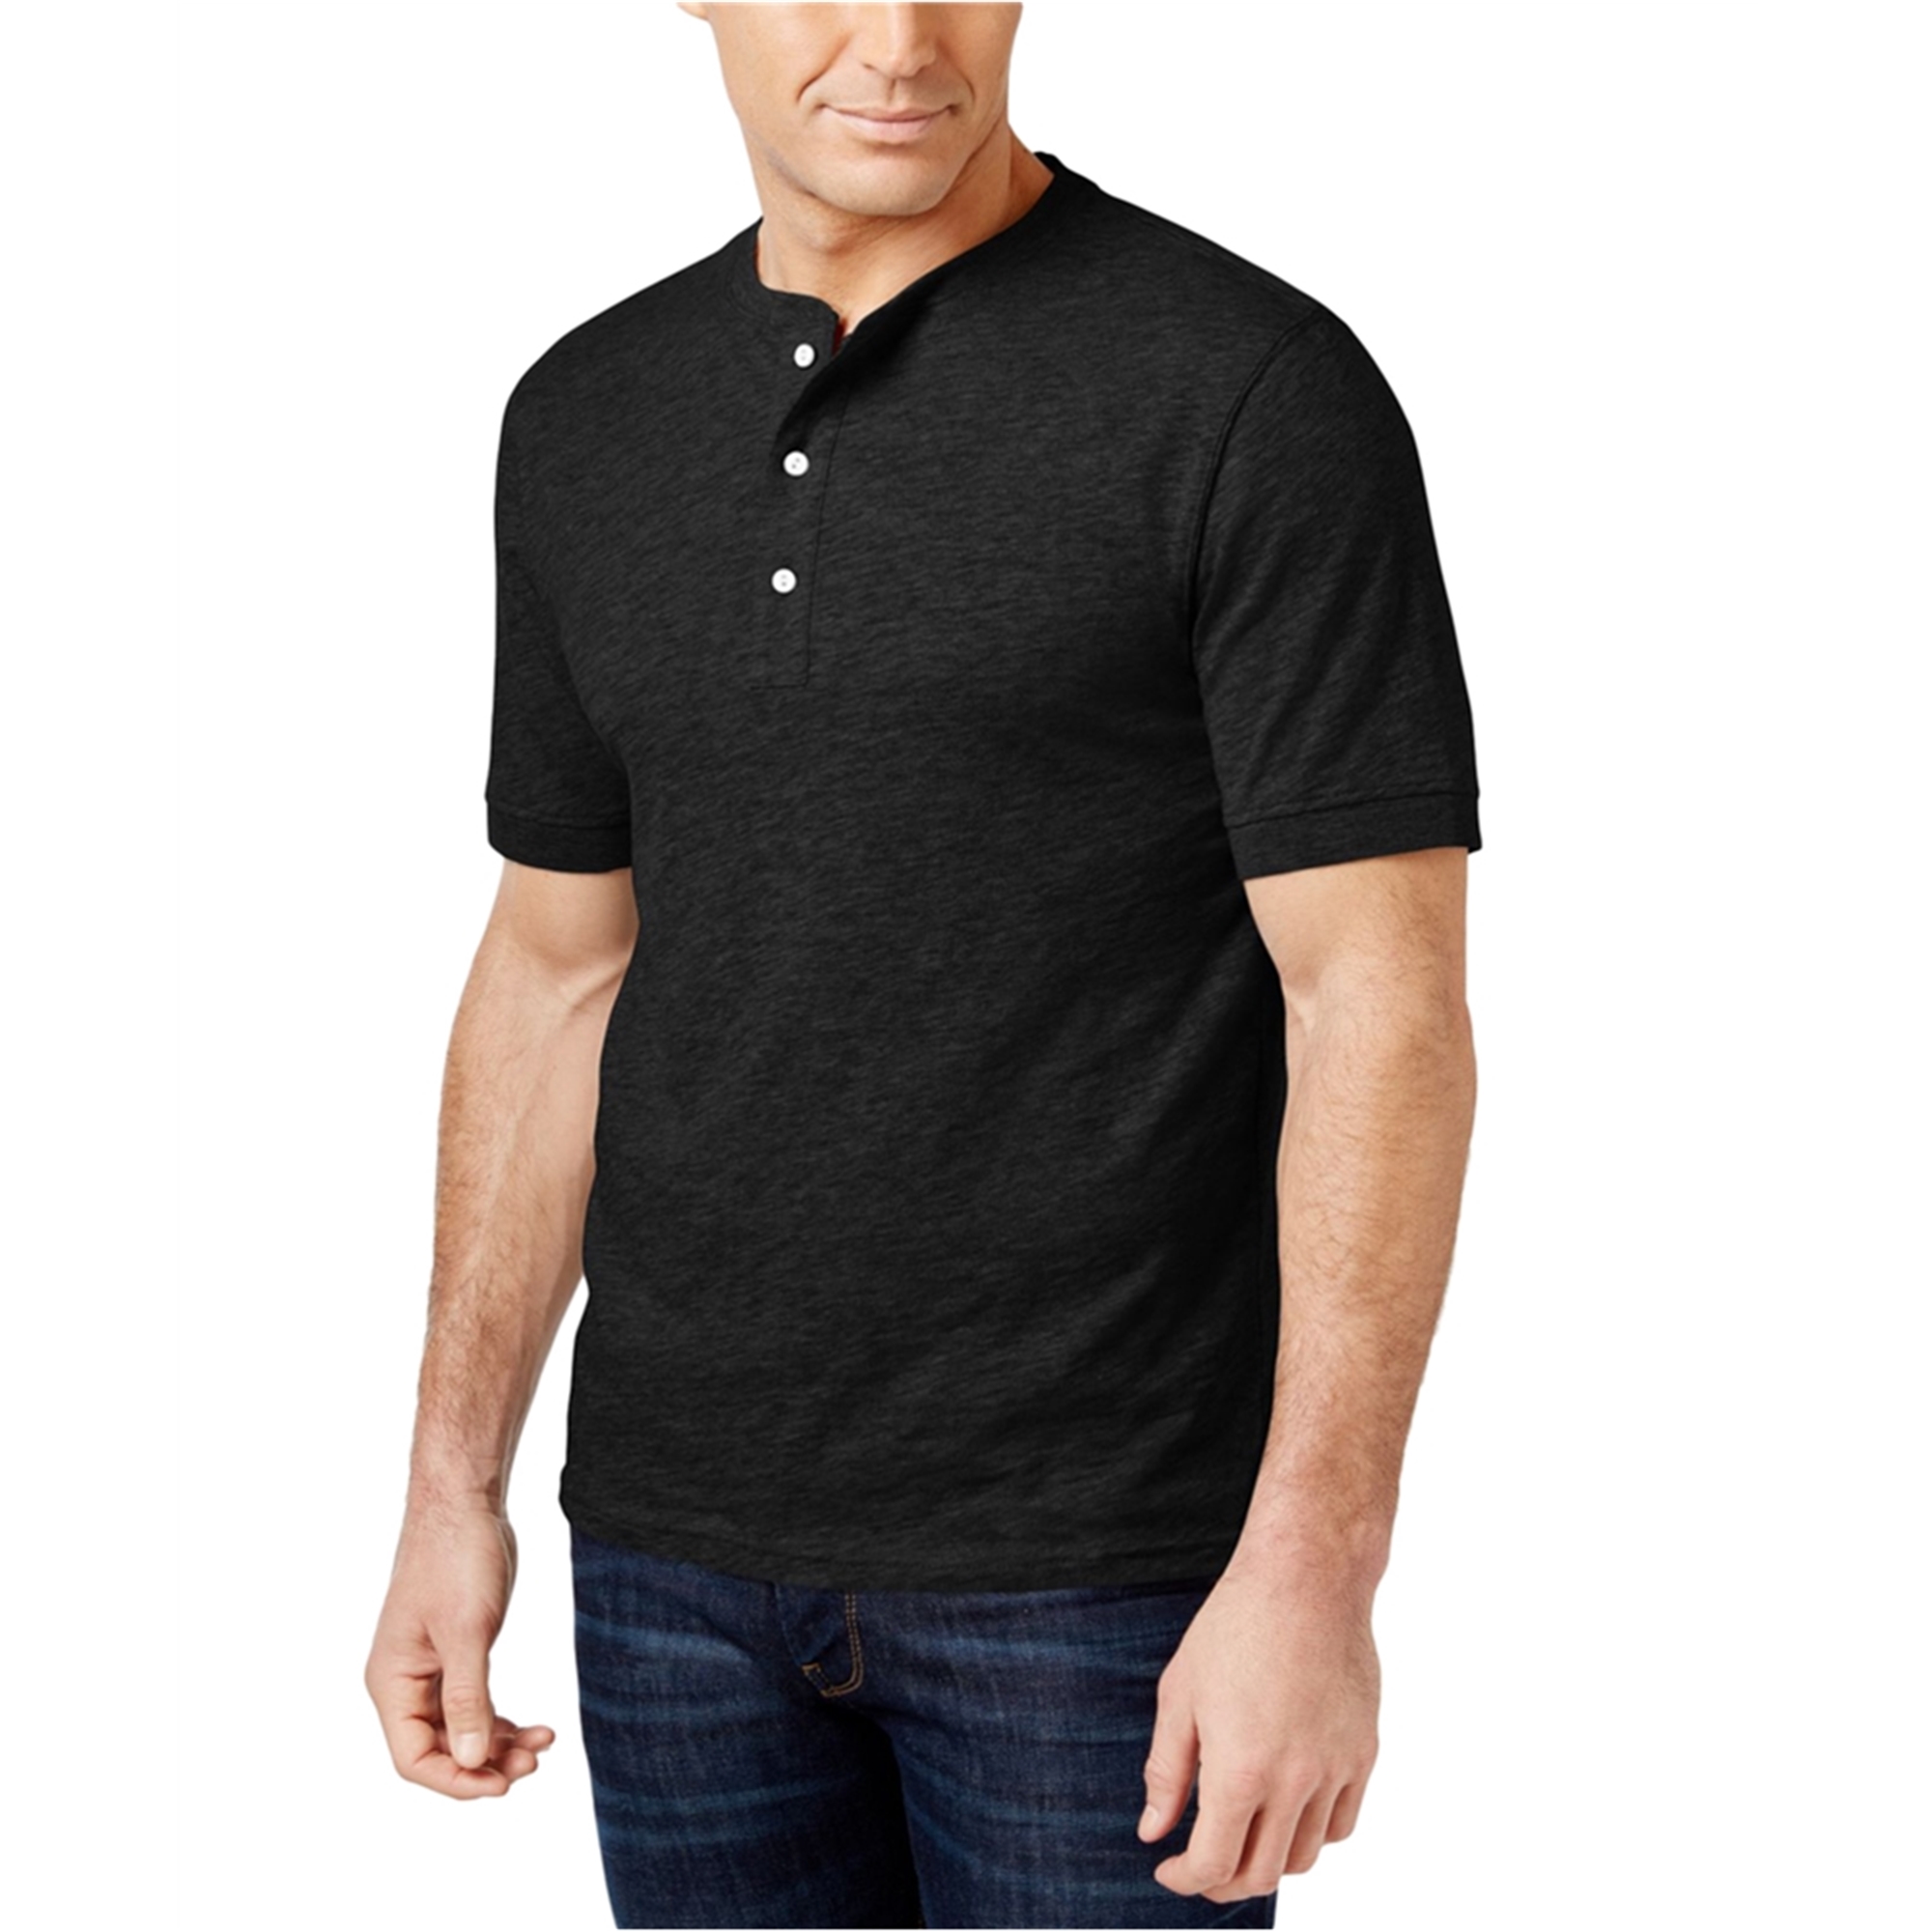 Buy a Mens Club Room Solid SS Henley Shirt Online | TagsWeekly.com